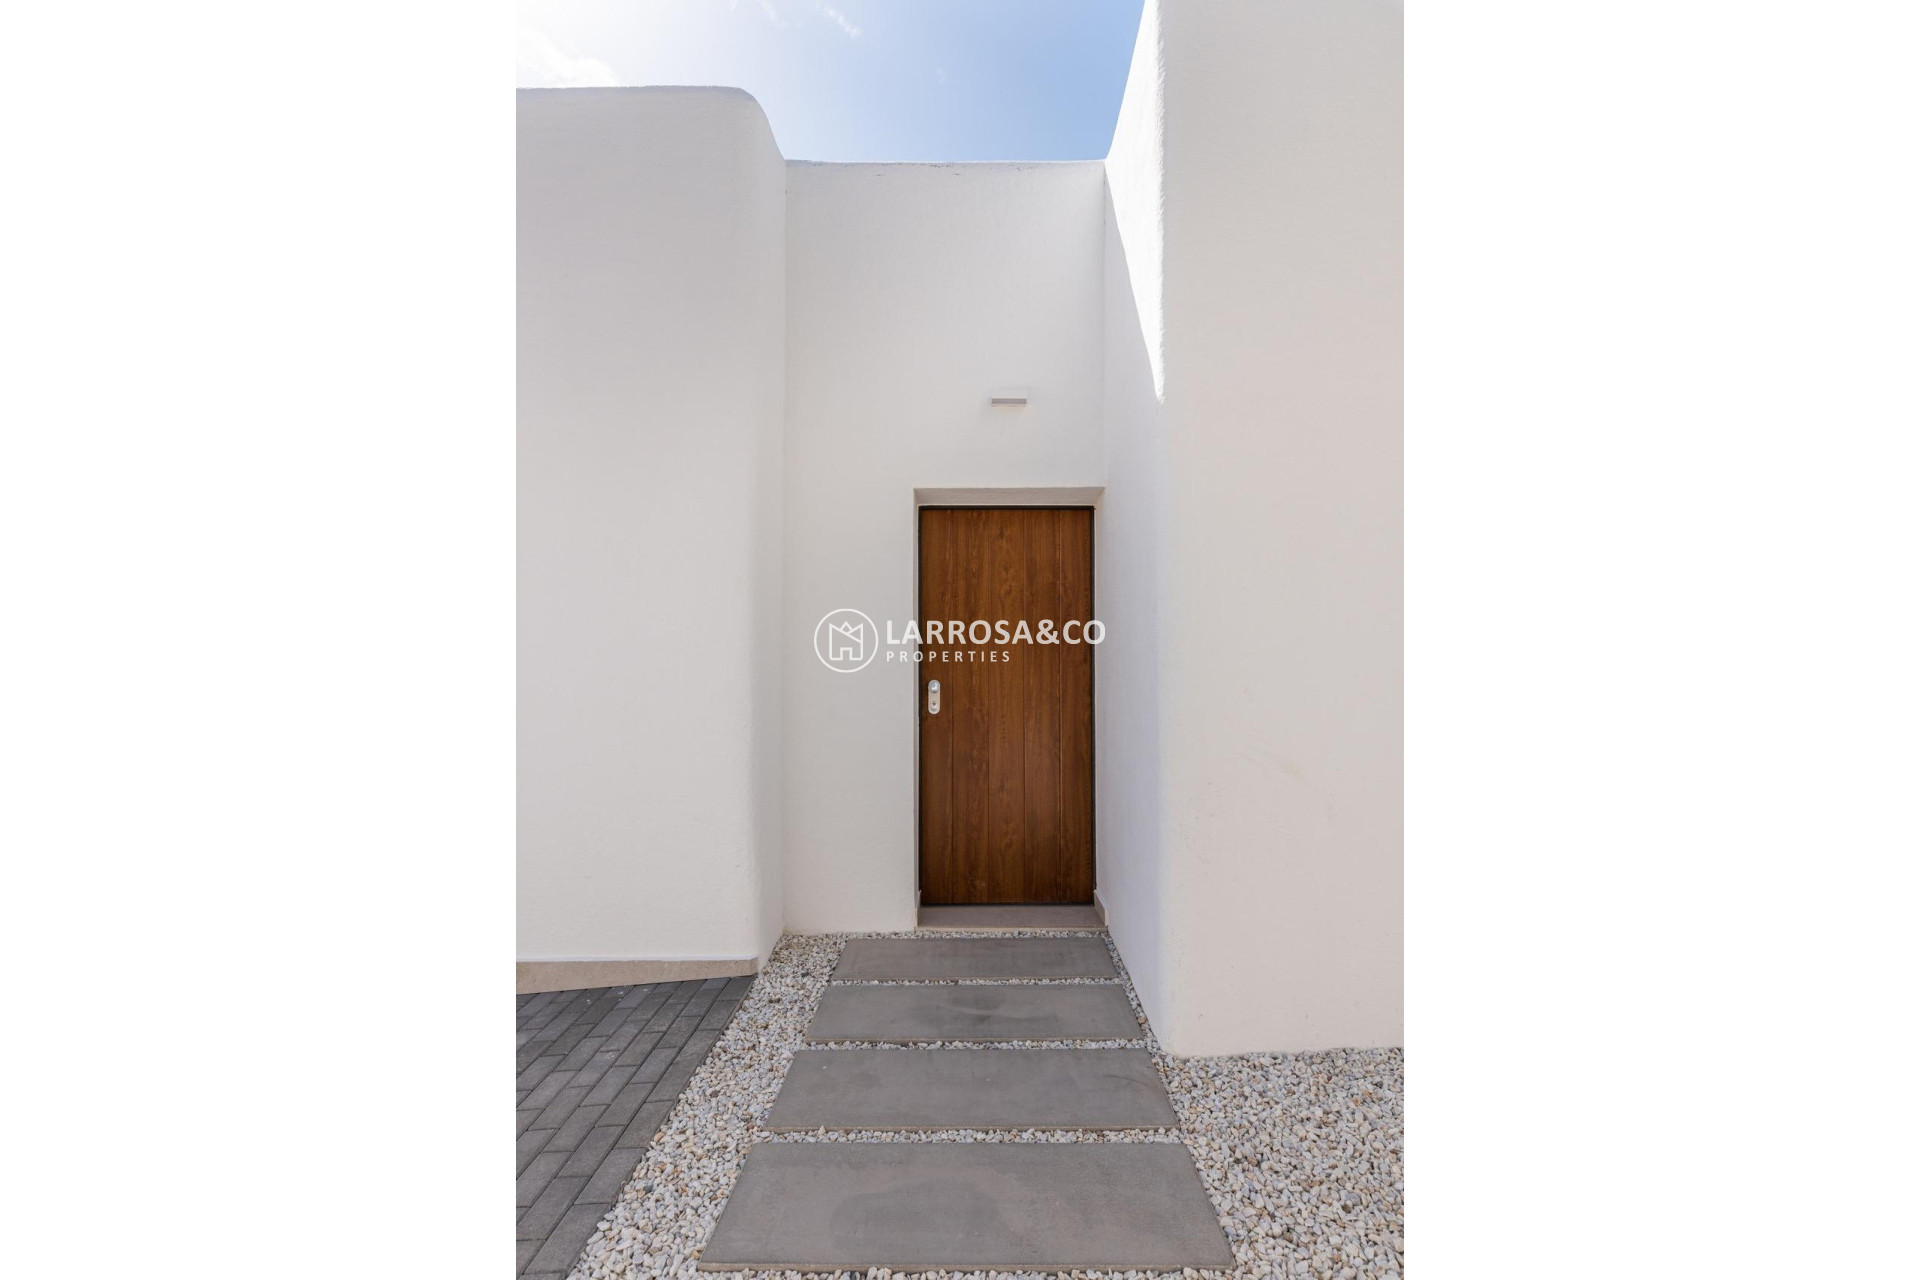 New build - Detached House/Villa - Dolores - polideportivo